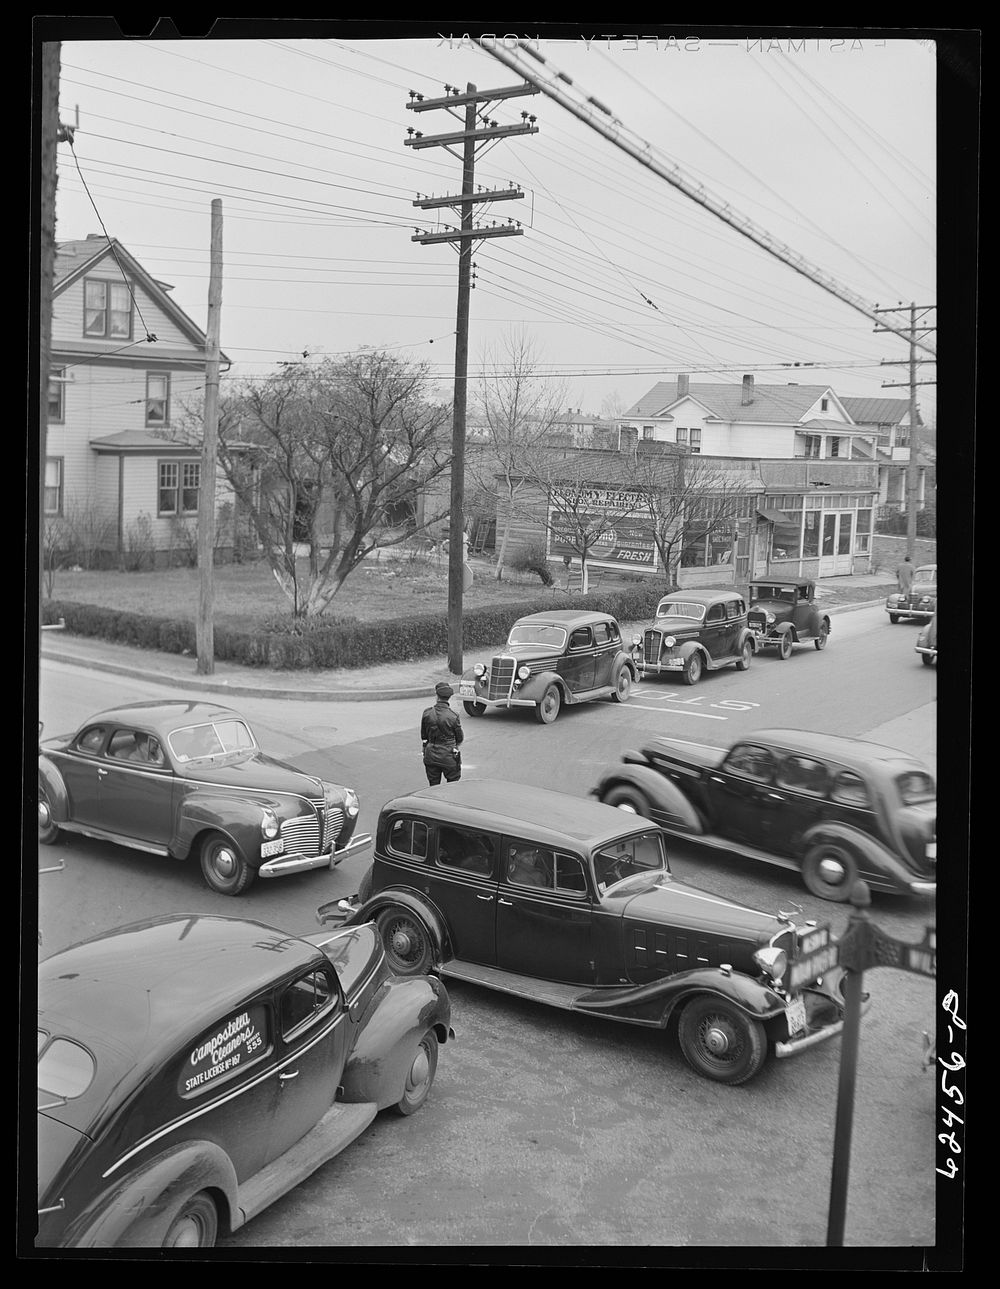 Four o'clock traffic, Norfolk, Virginia. Sourced from the Library of Congress.